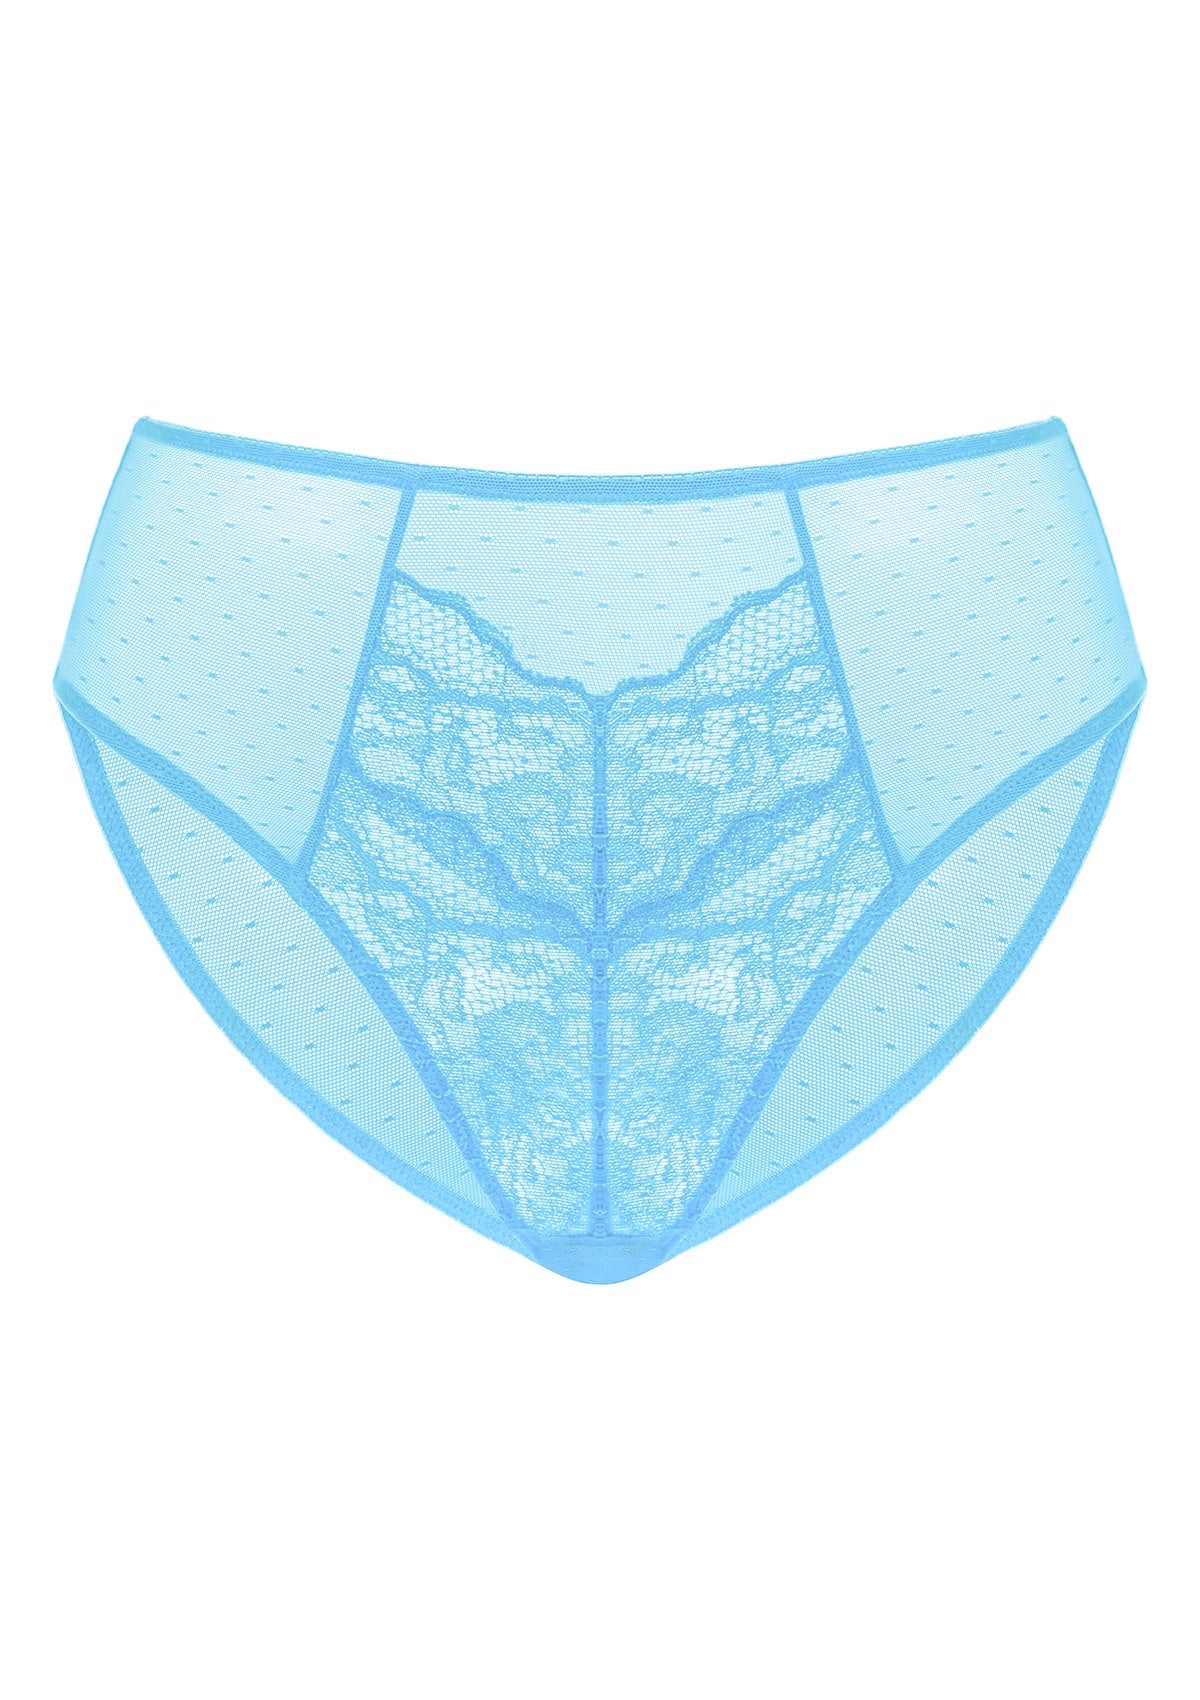 HSIA Enchante High-Rise Floral Lacy Panty-Comfort In Style - XXXL / Capri Blue